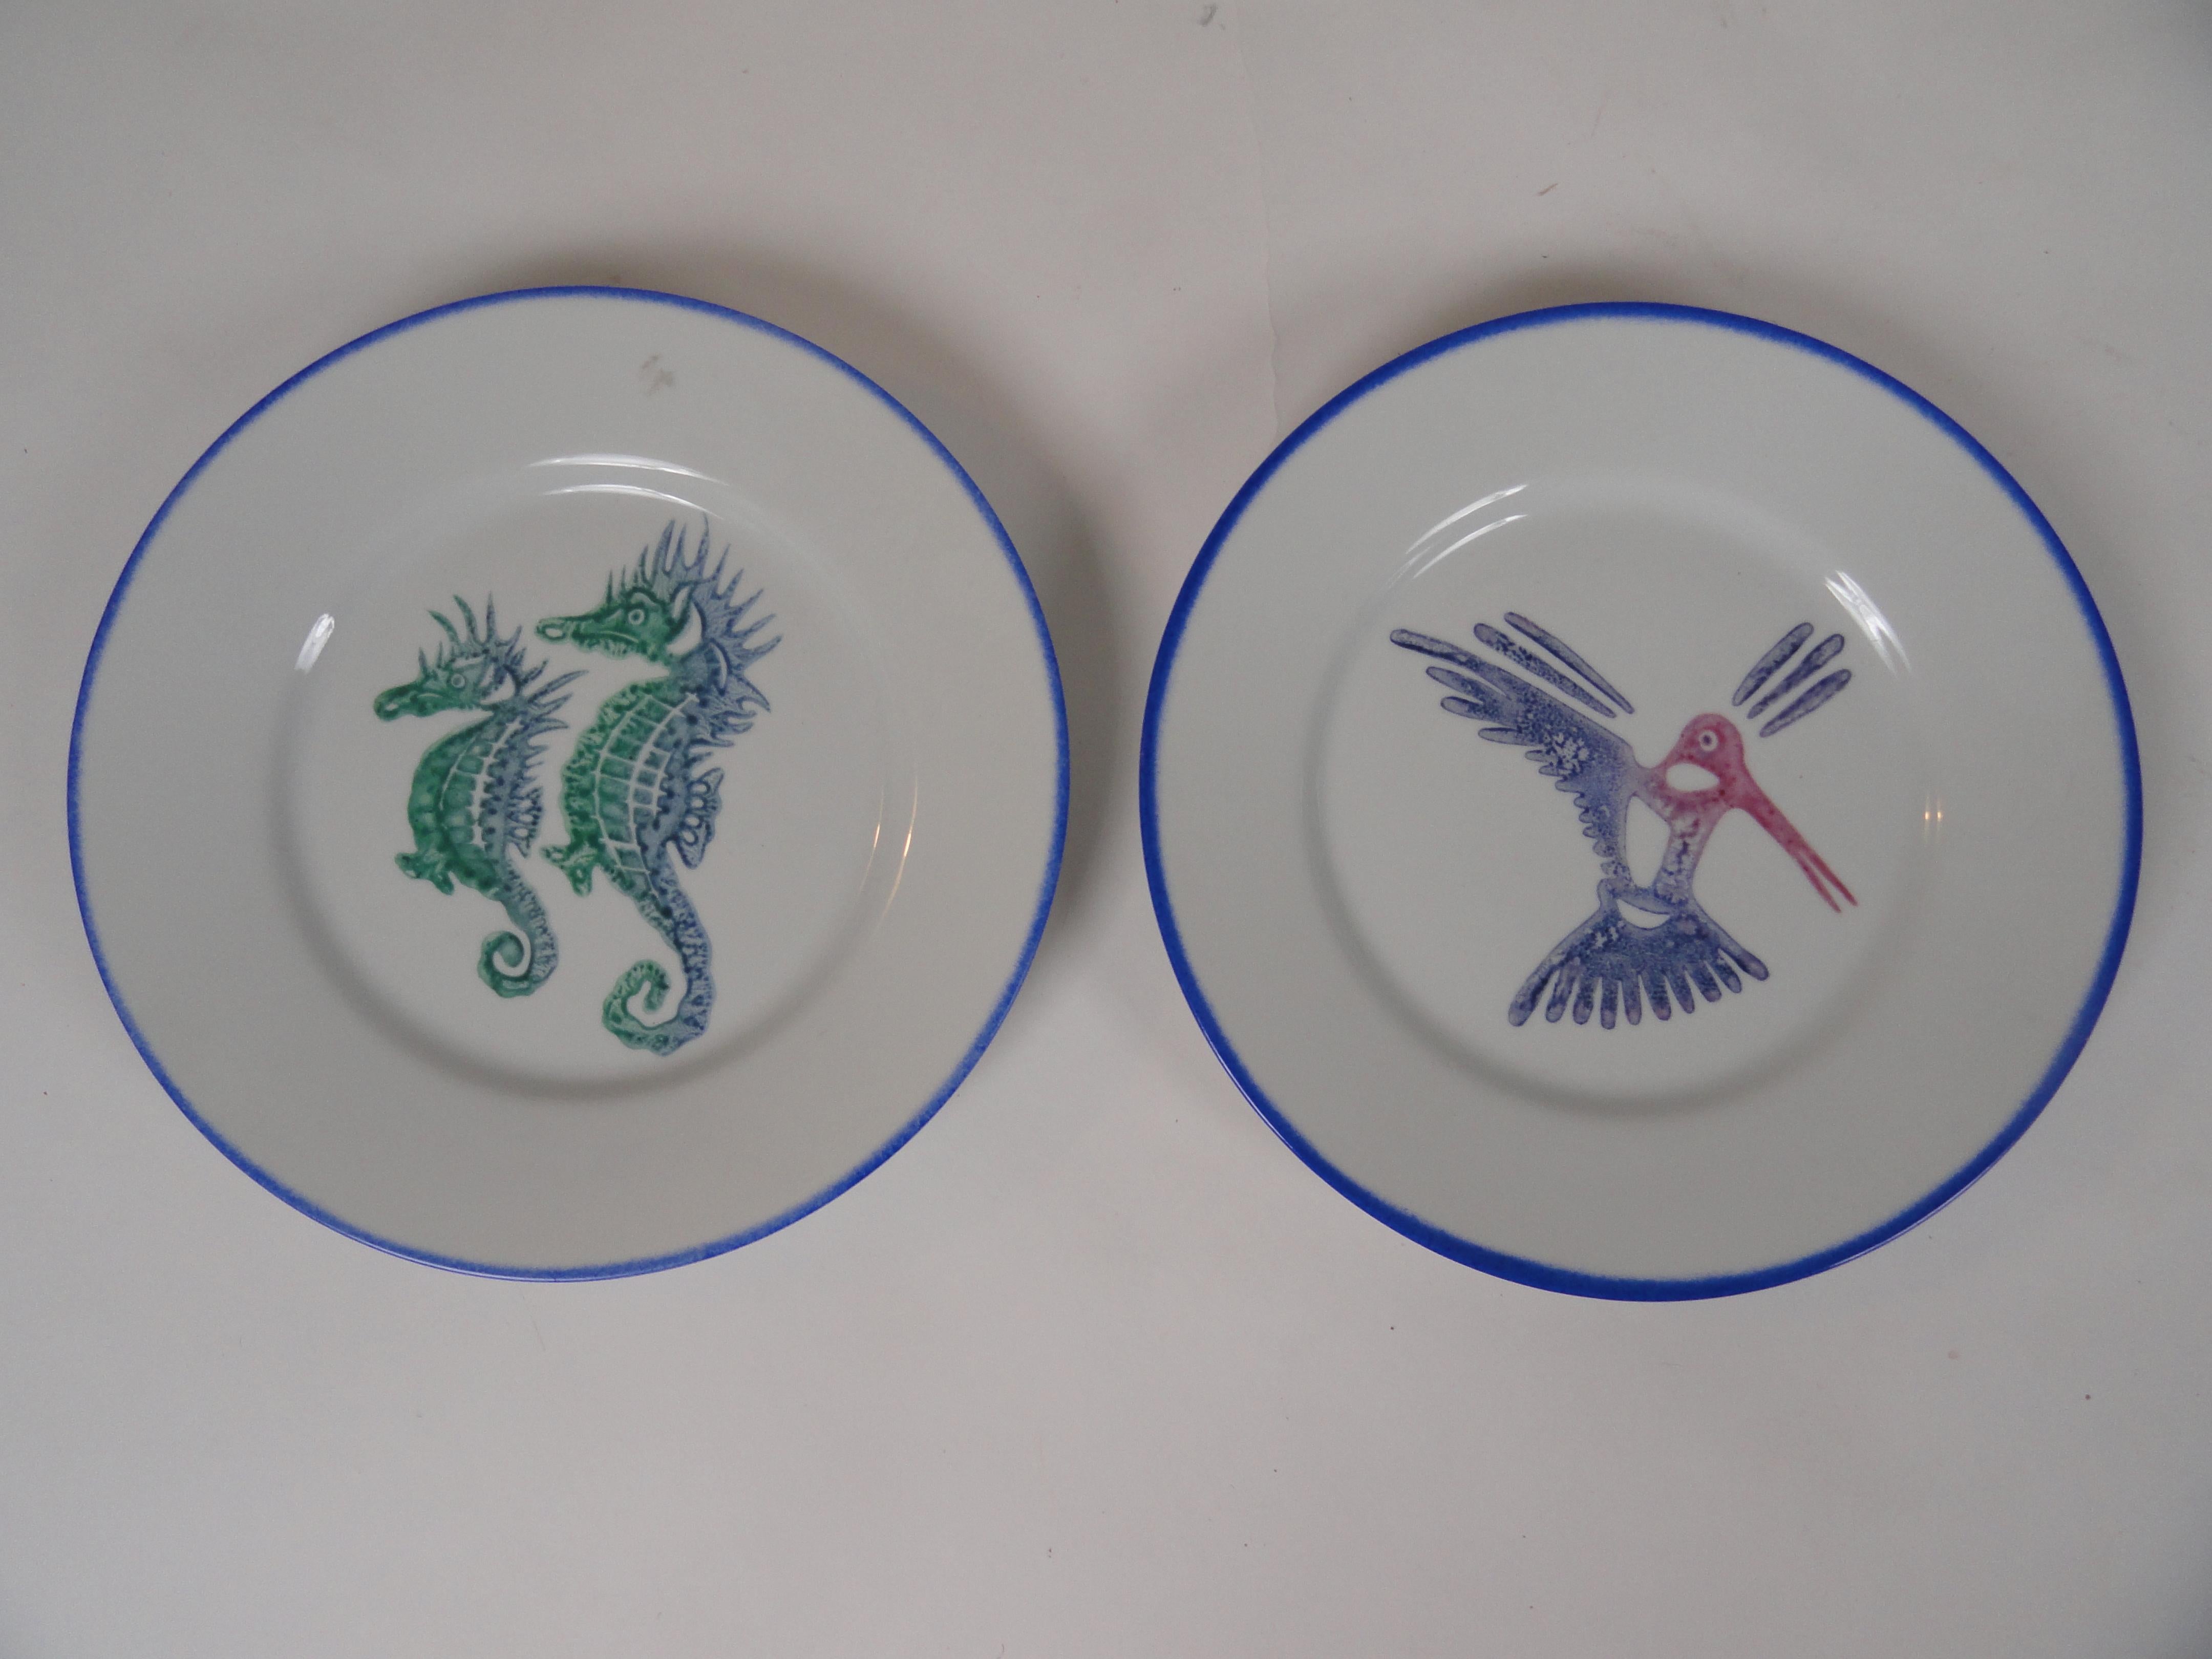 Limoges, France porcelain plates with original drawings by Jean Yves Froment, an artist from St. Barths. Plates feature colorful birds and sea life. Seven larger plates and 3 smaller plates. Plates have green, yellow and blue borders.